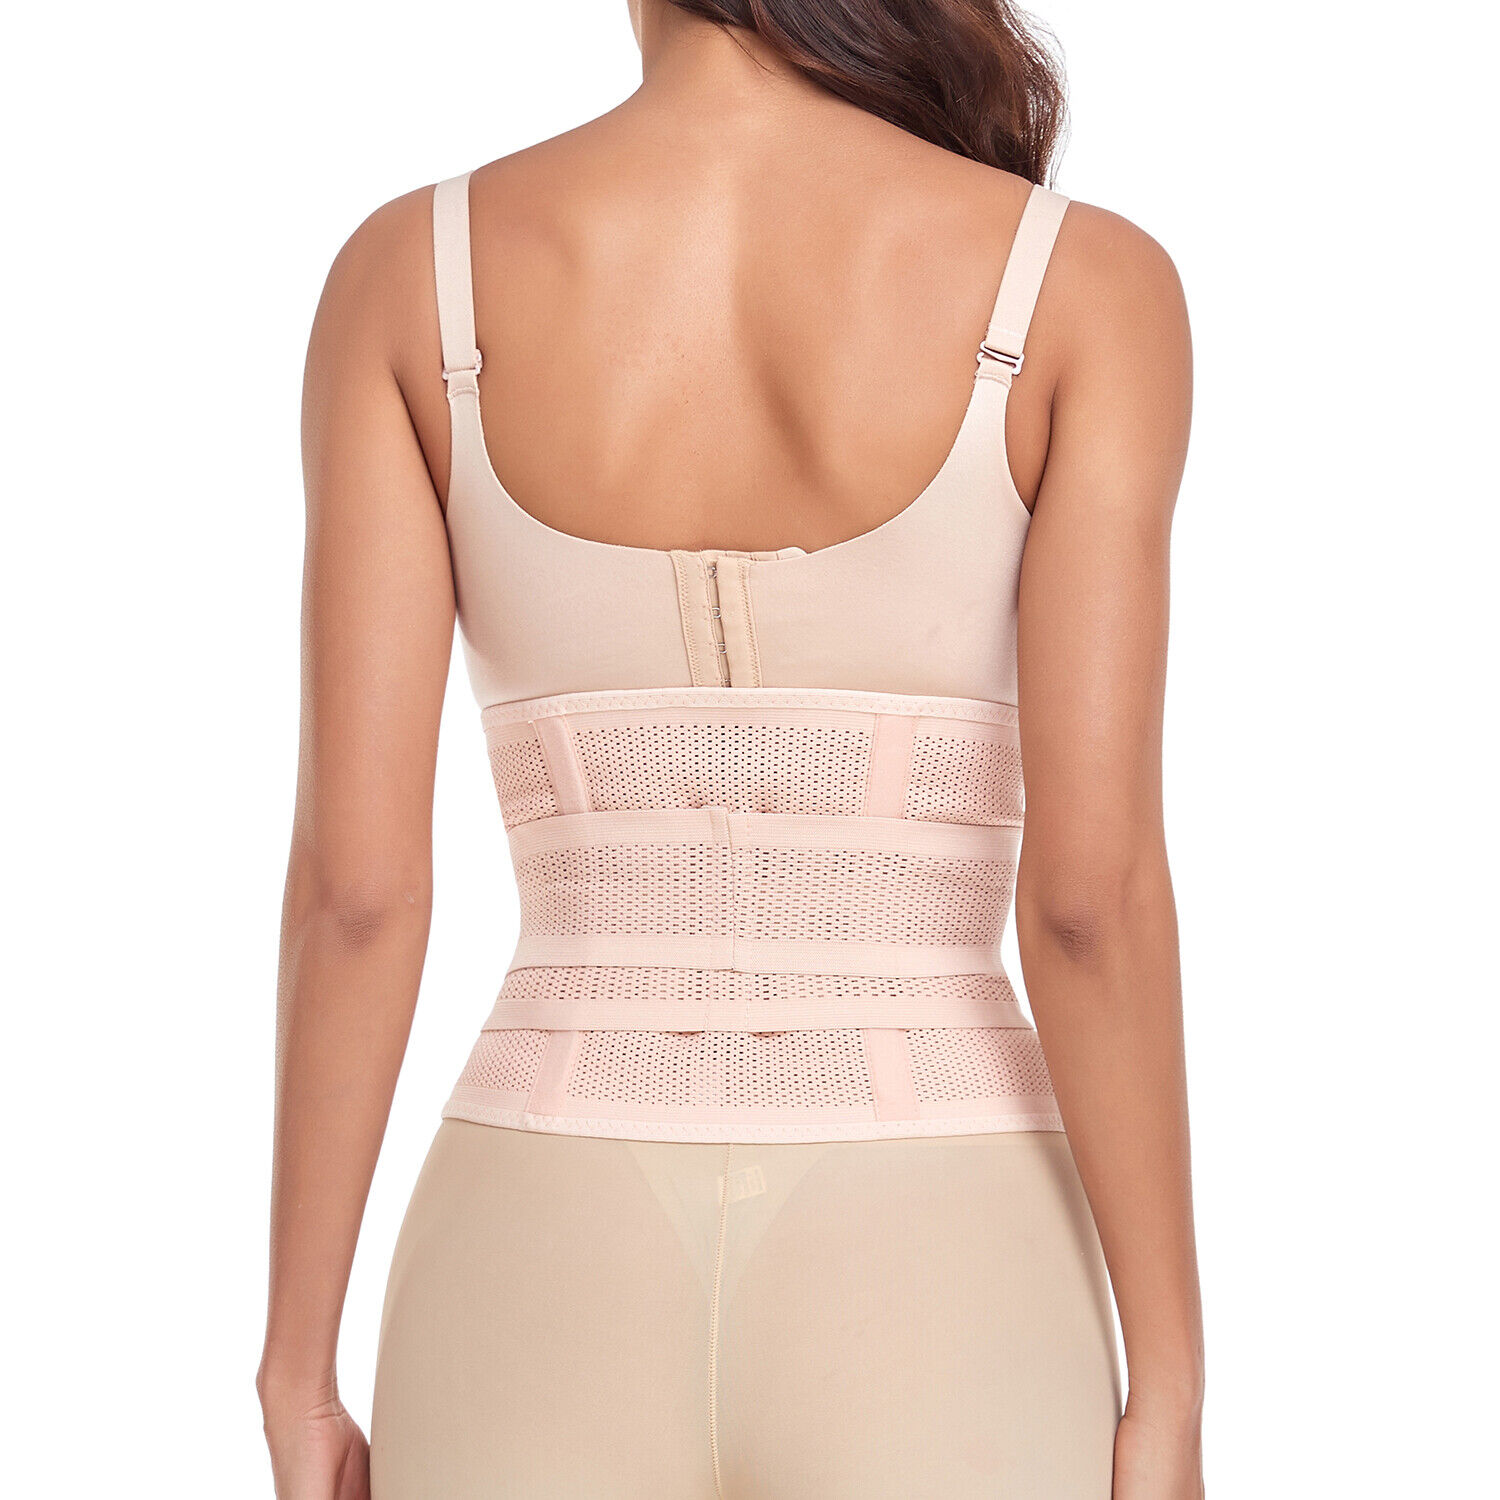 Postpartum Belly Recovery Belt Maternity Tummy Wrap Corset Post Pregnancy  Girdle - Helia Beer Co